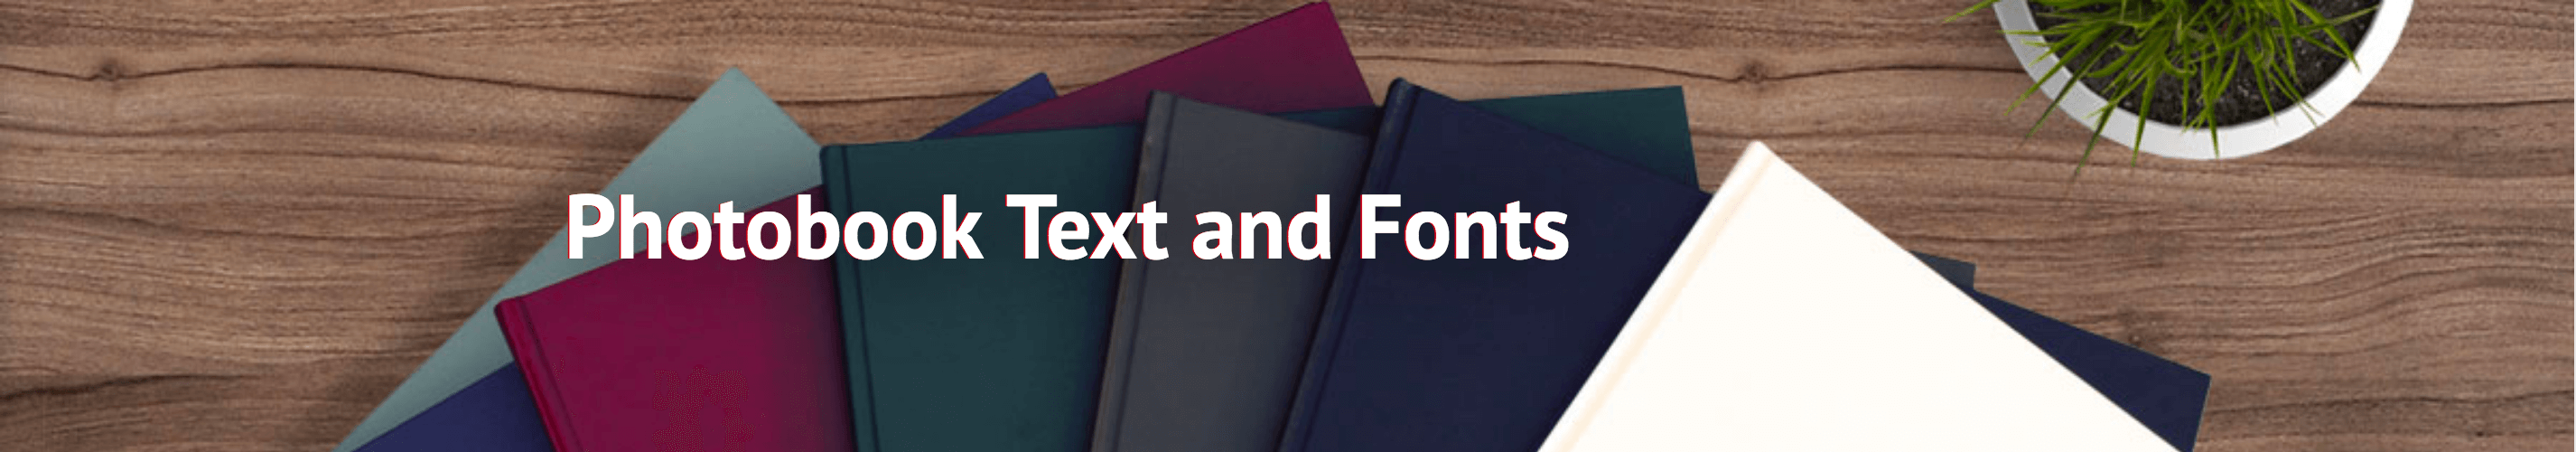 Photobook text and fonts